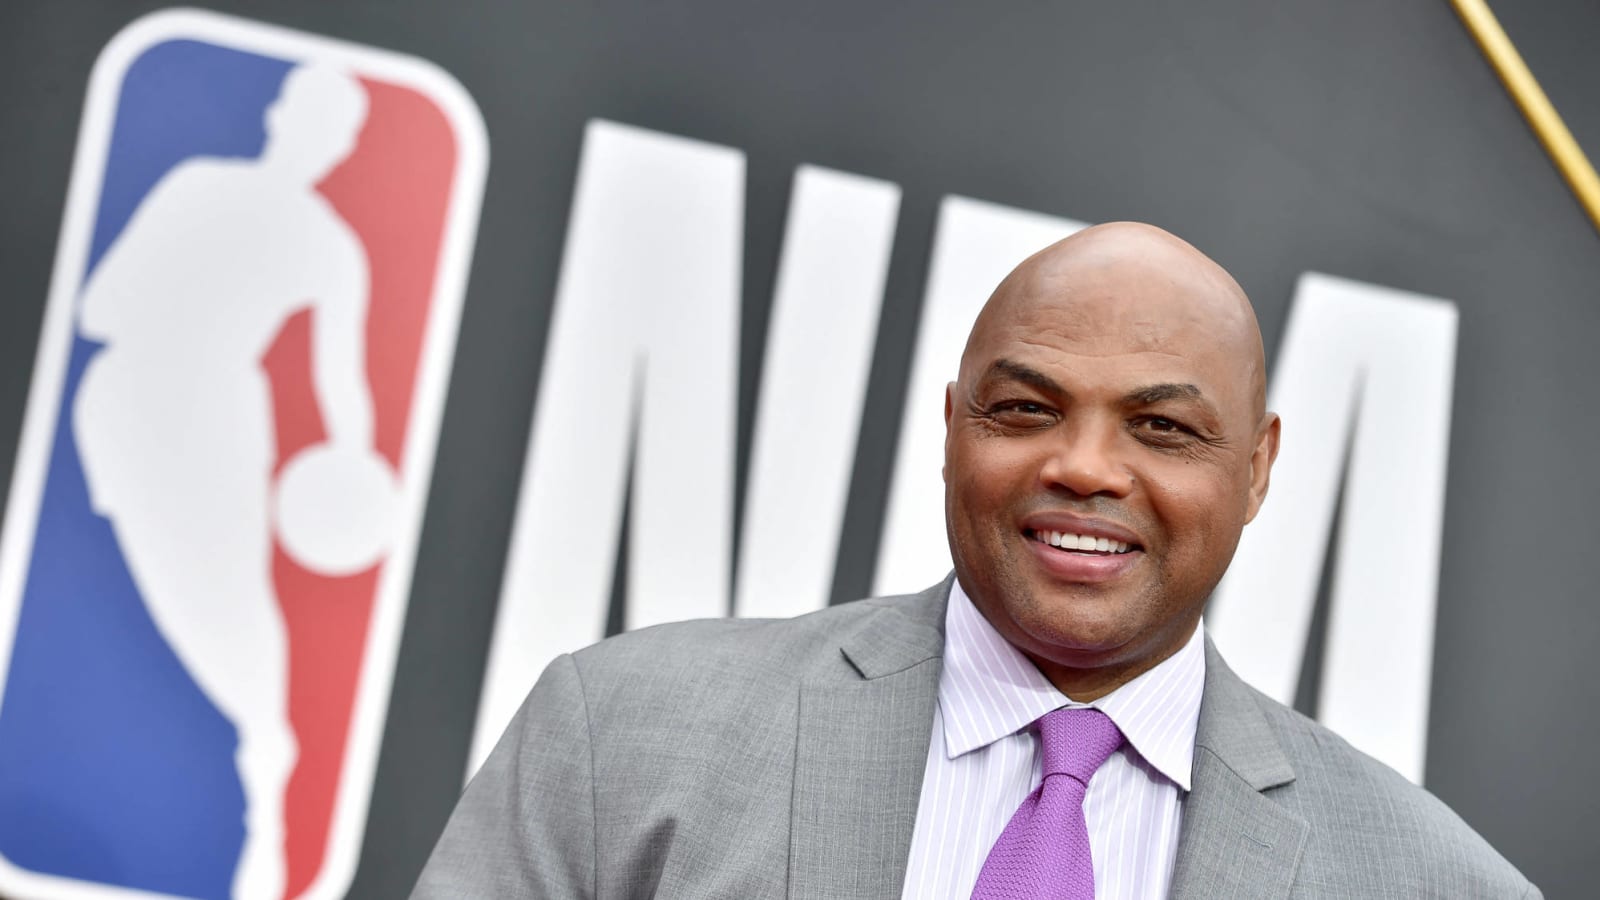 Charles Barkley had incredibly ironic criticism of today’s NBA players